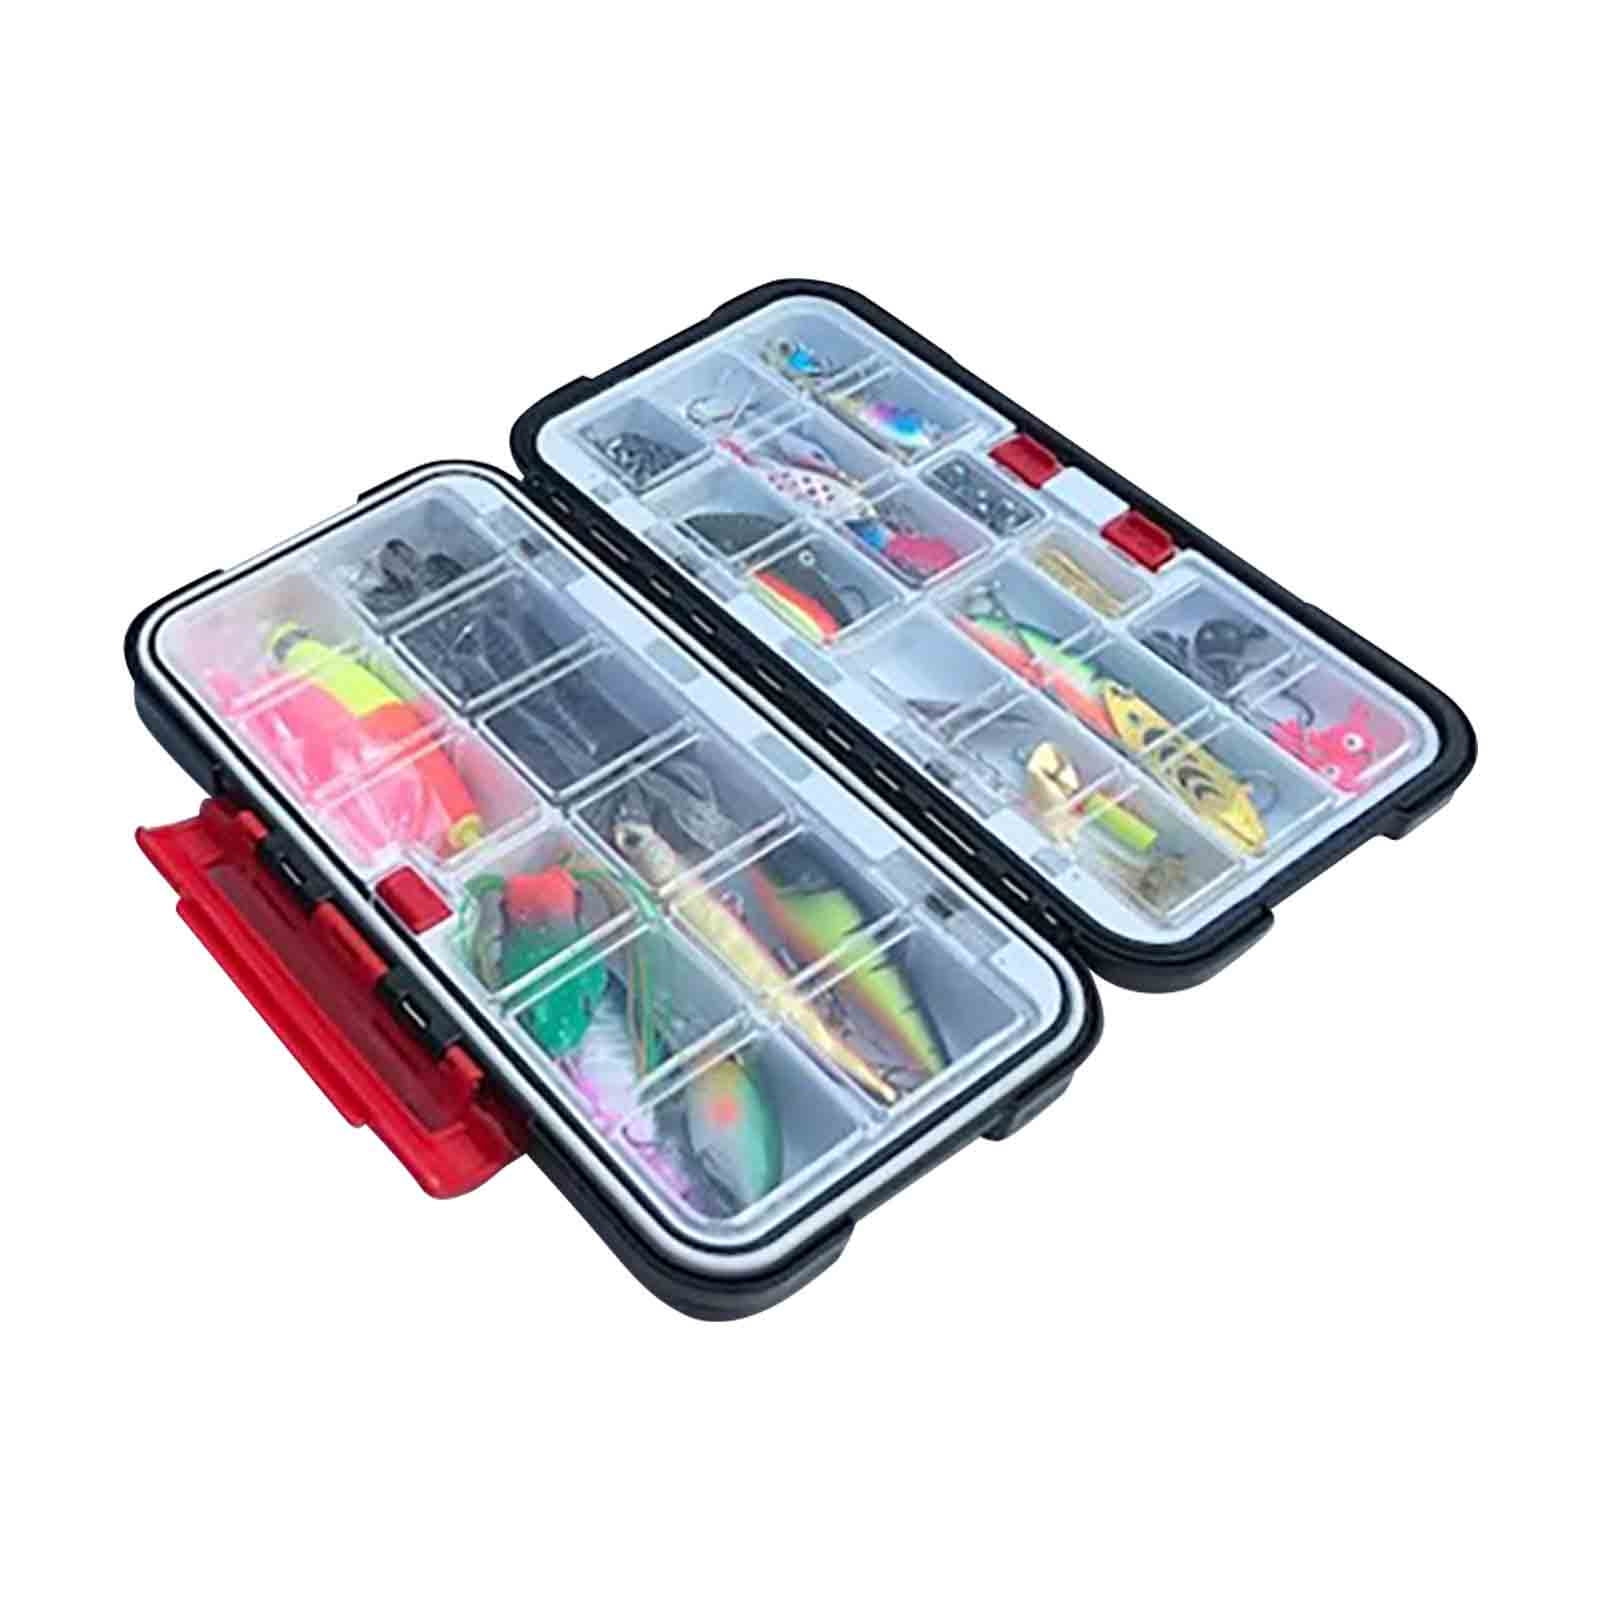 Christmas Clearance Deals umhouerse Sports & Outdoors Fishing Gear Box  Countdown Gift Fishing Tackle Advent Calendar Clearance